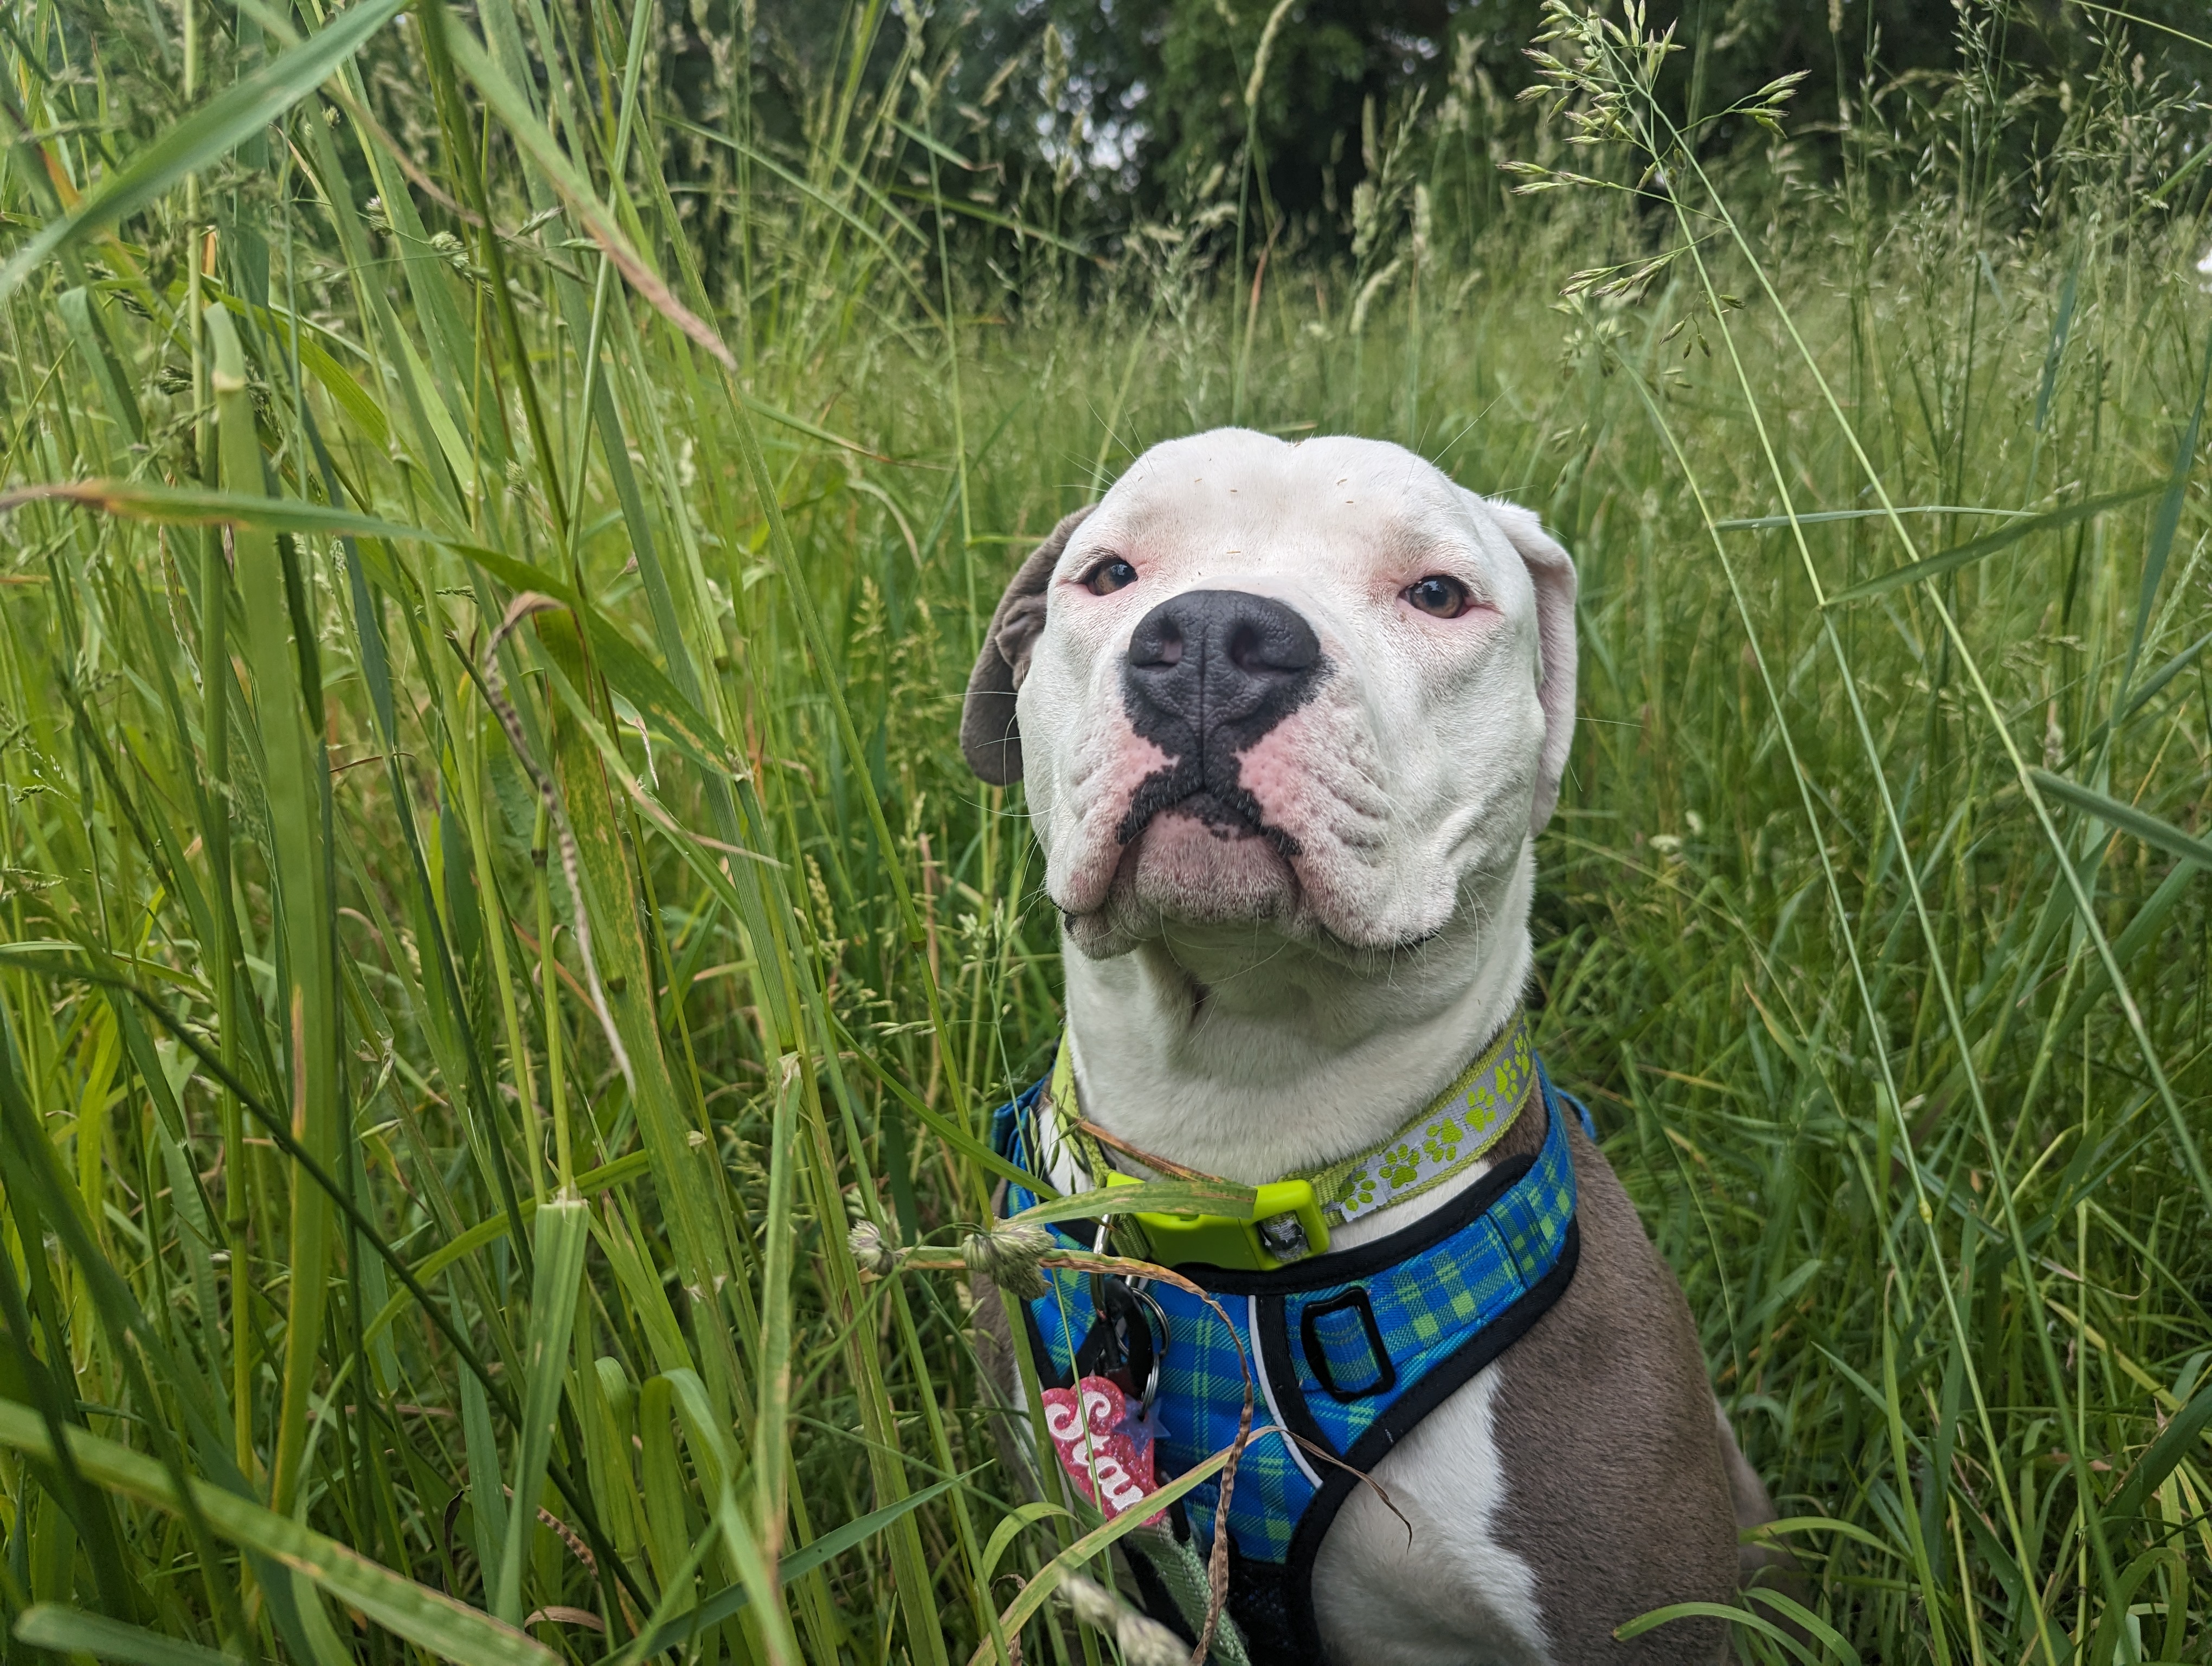 An image of Star, a white and gray pitbull wearing a blue harness, sitting in a field of grass and smirking at the camera.